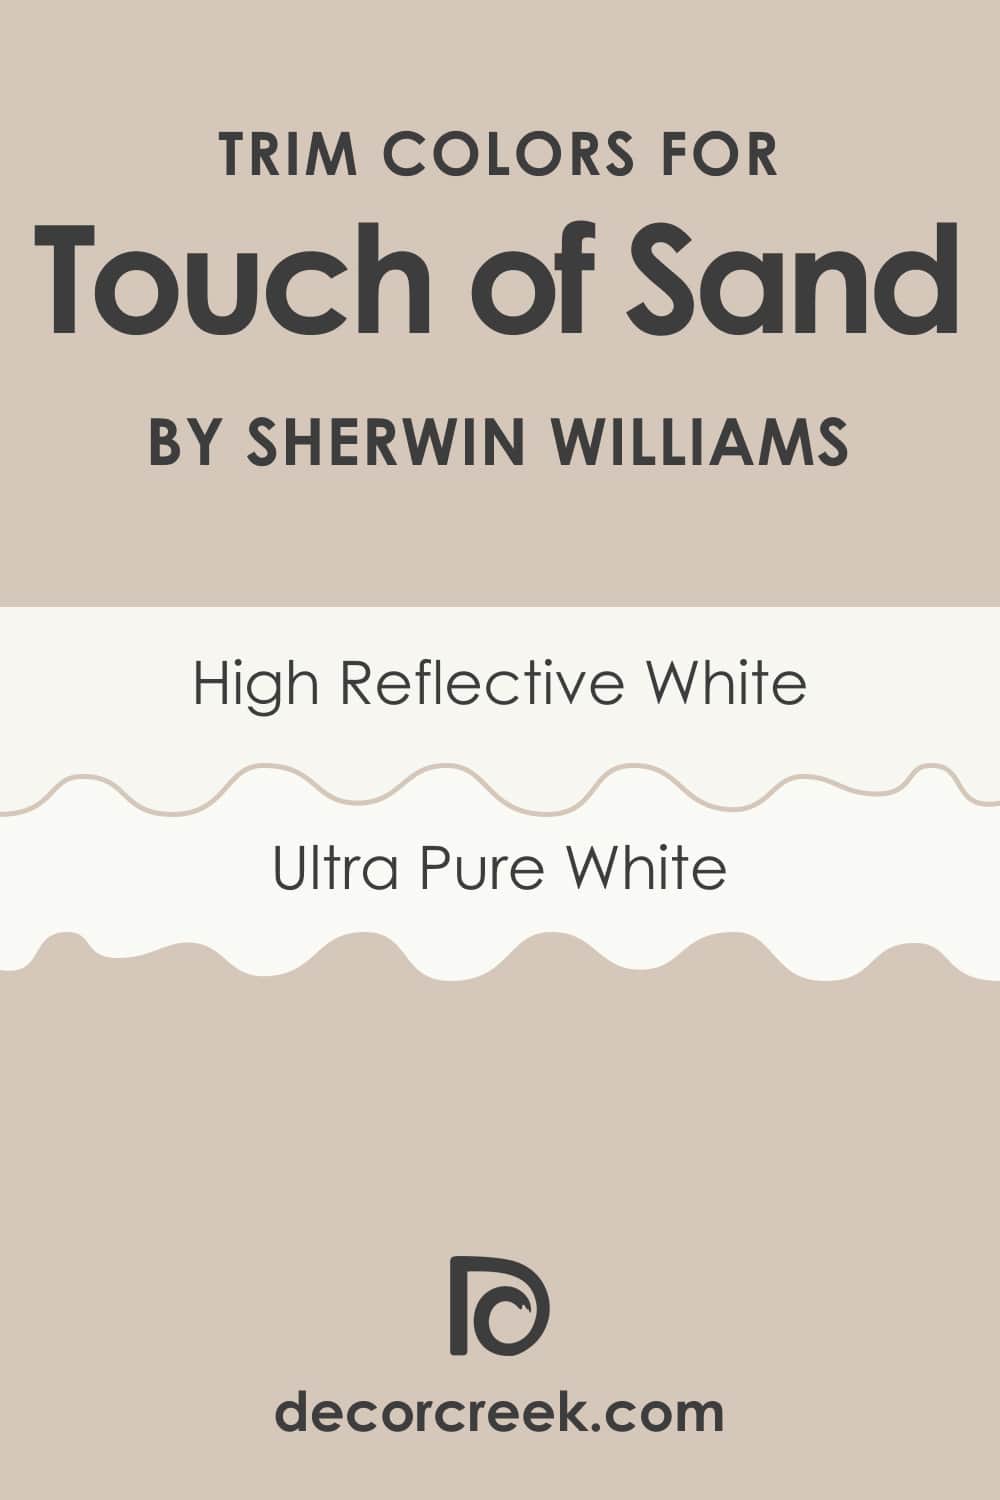 What Is the Best Trim Color for SW Touch of Sand?